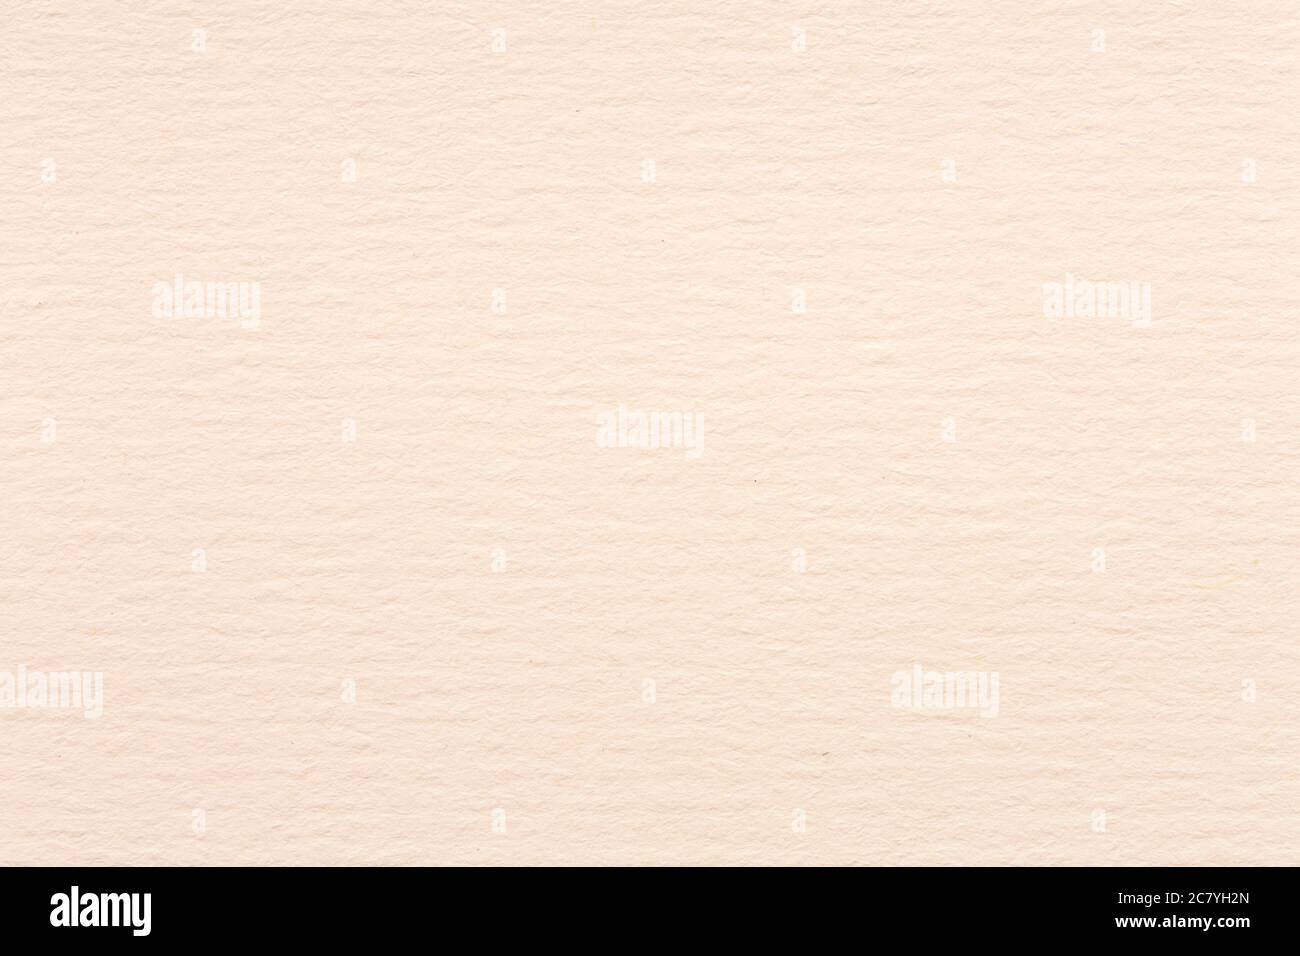 https://c8.alamy.com/comp/2C7YH2N/abstract-cream-background-of-beige-color-on-white-canvas-linen-texture-solid-website-background-2C7YH2N.jpg